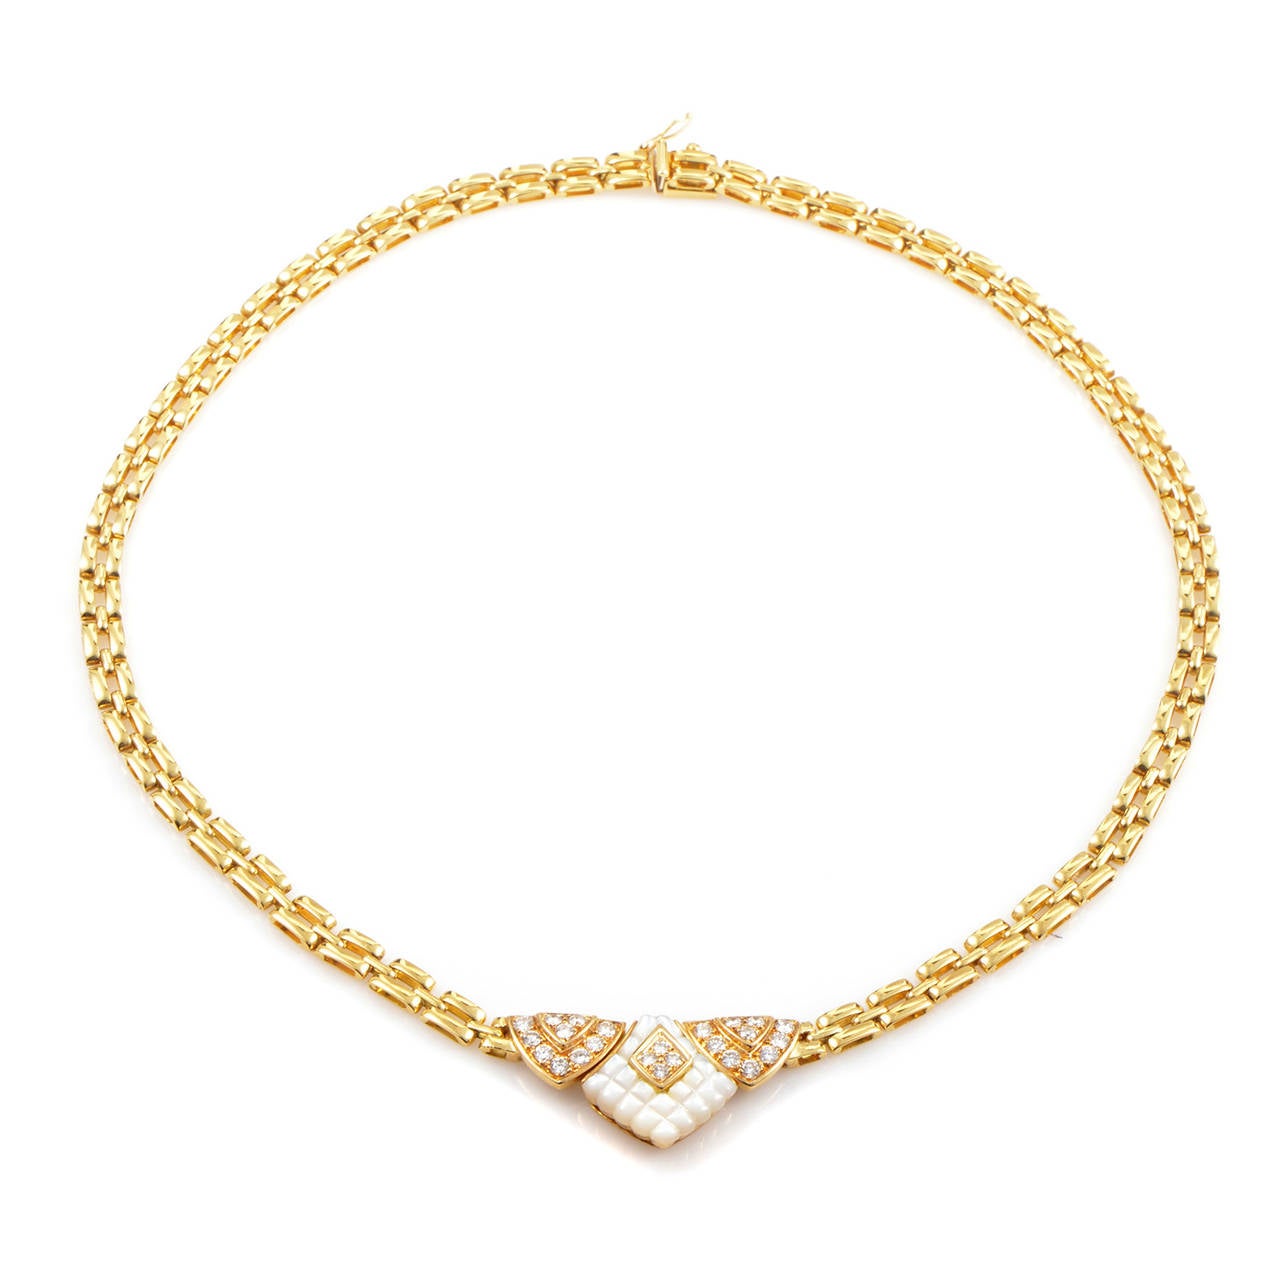 Classy and feminine, this gorgeous Mauboussin necklace is made of attractive 18K yellow gold and boasts a delightful pendant set with mother of pearl and 1.45 carats of glittering white diamonds.

Approximate Dimensions:
Drop of the Necklace: